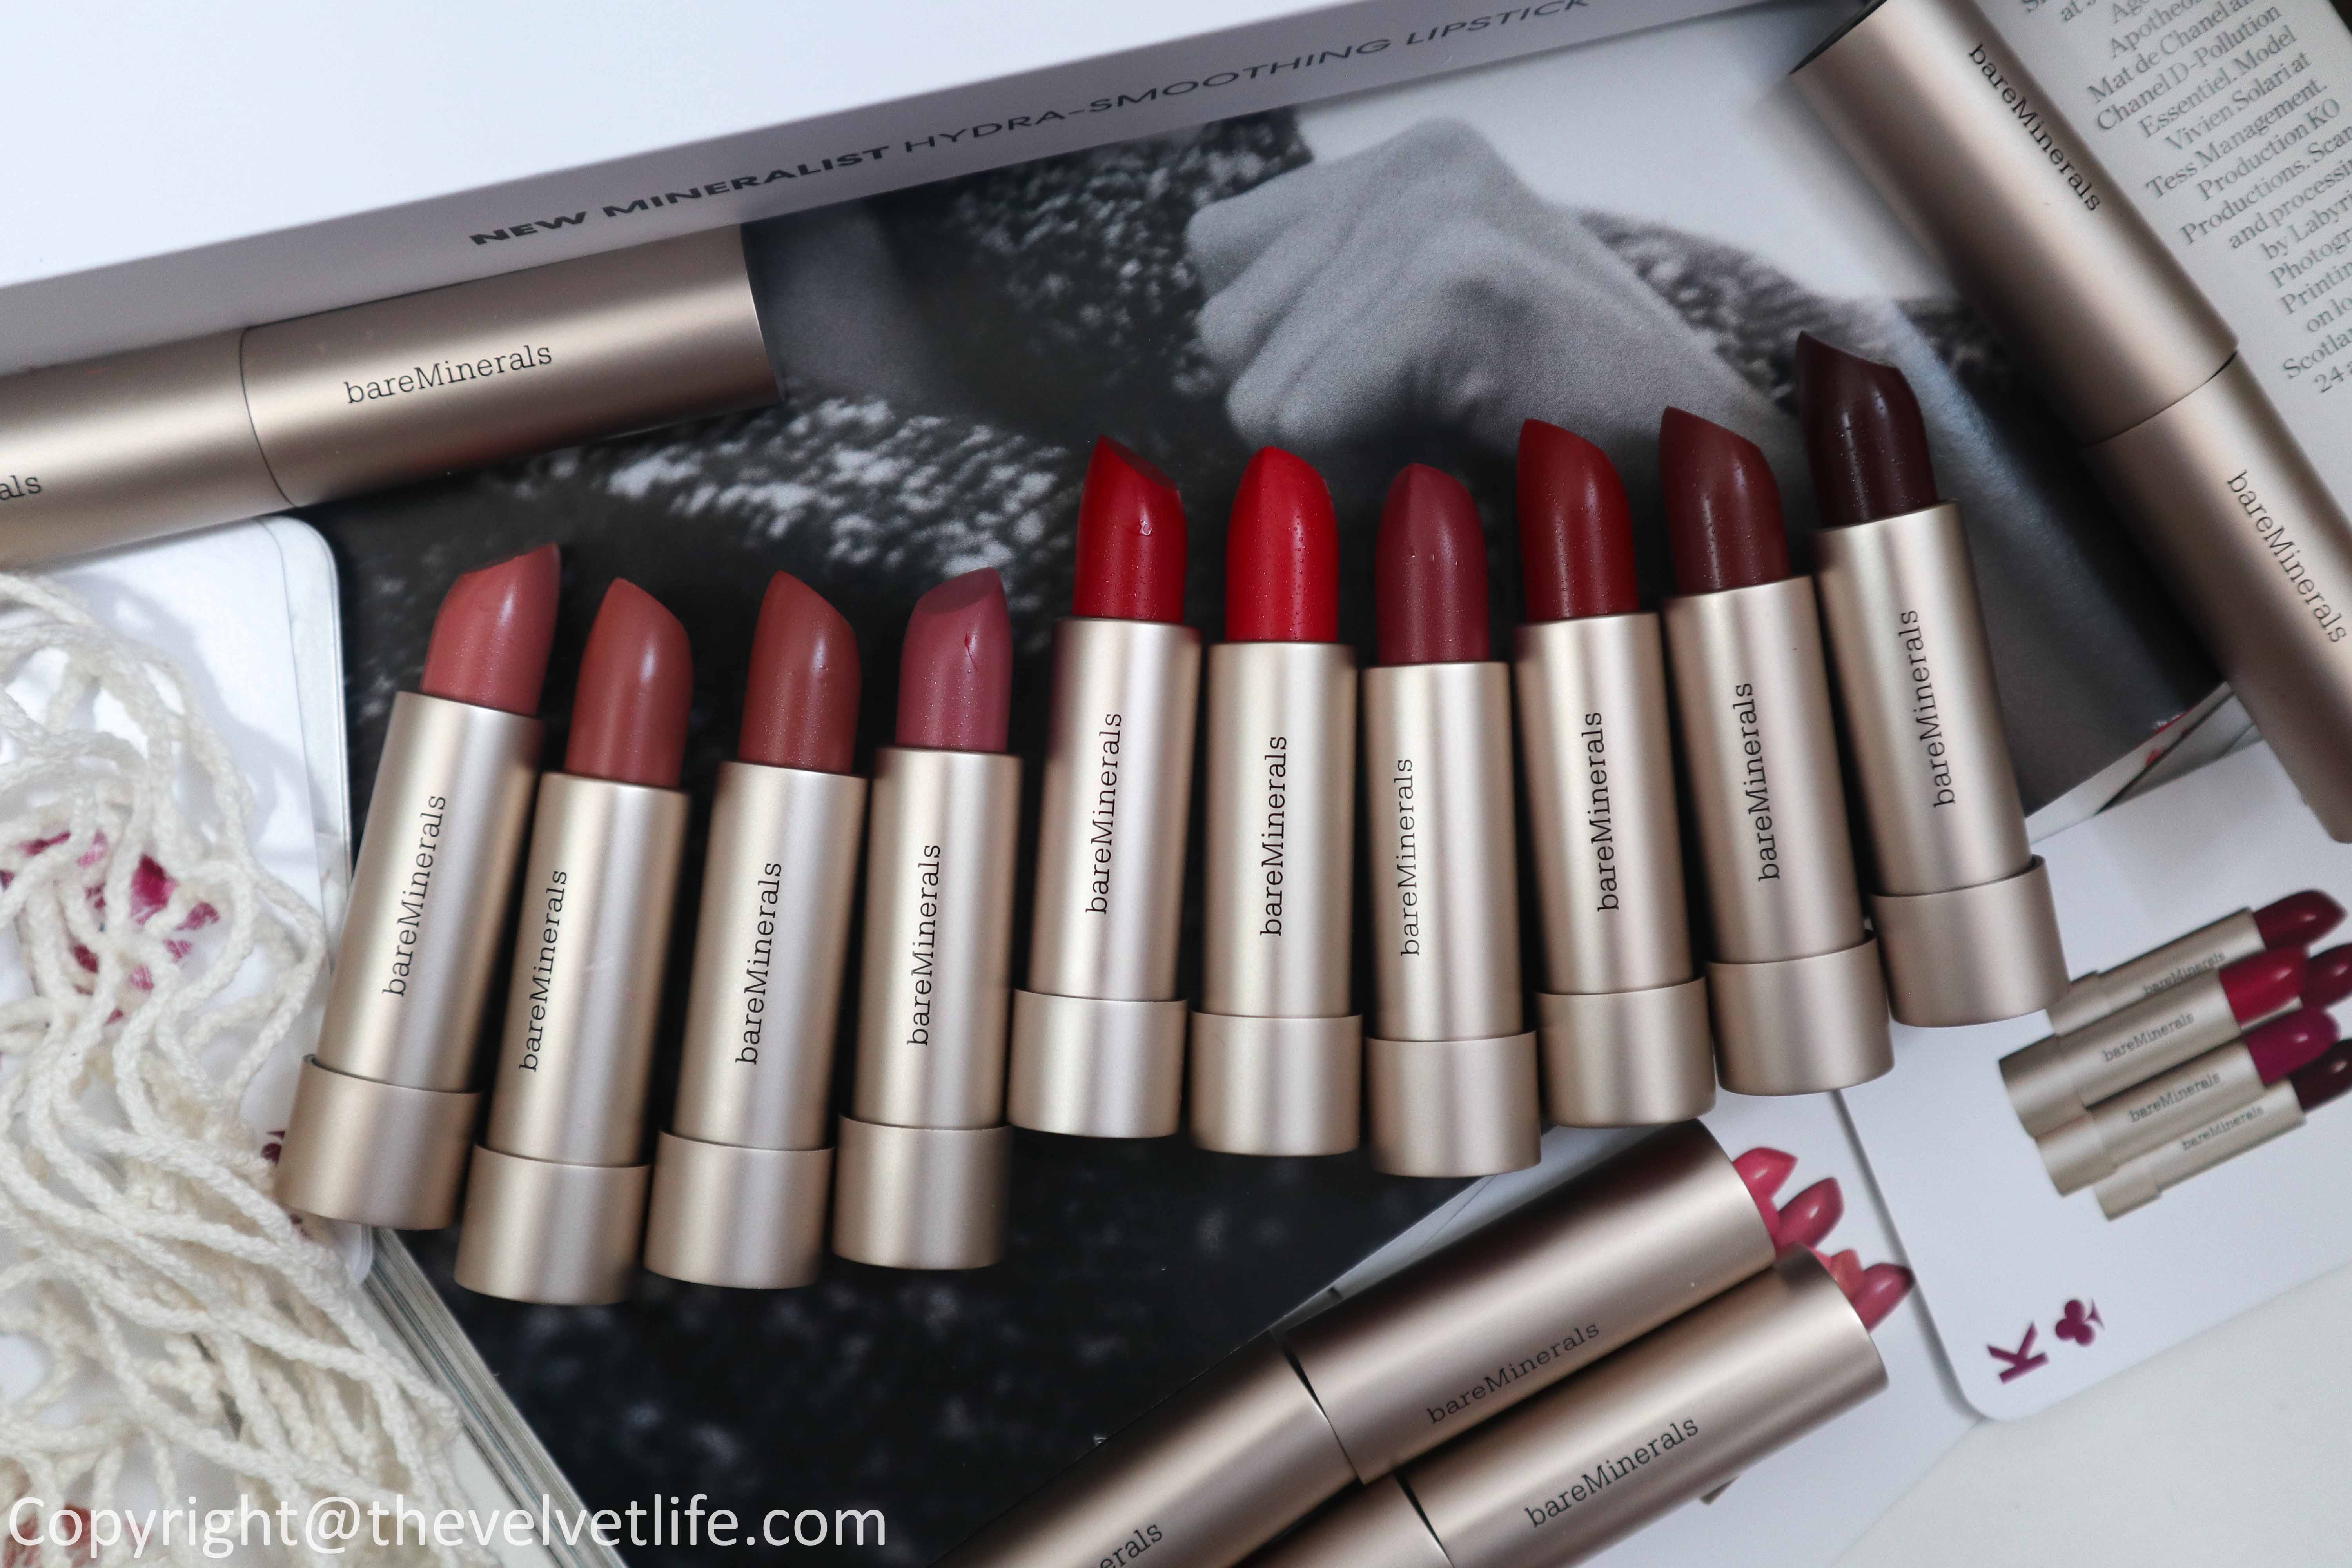 Review and swatches of the new bareMinerals Mineralist Hydra-Smoothing Lipstick